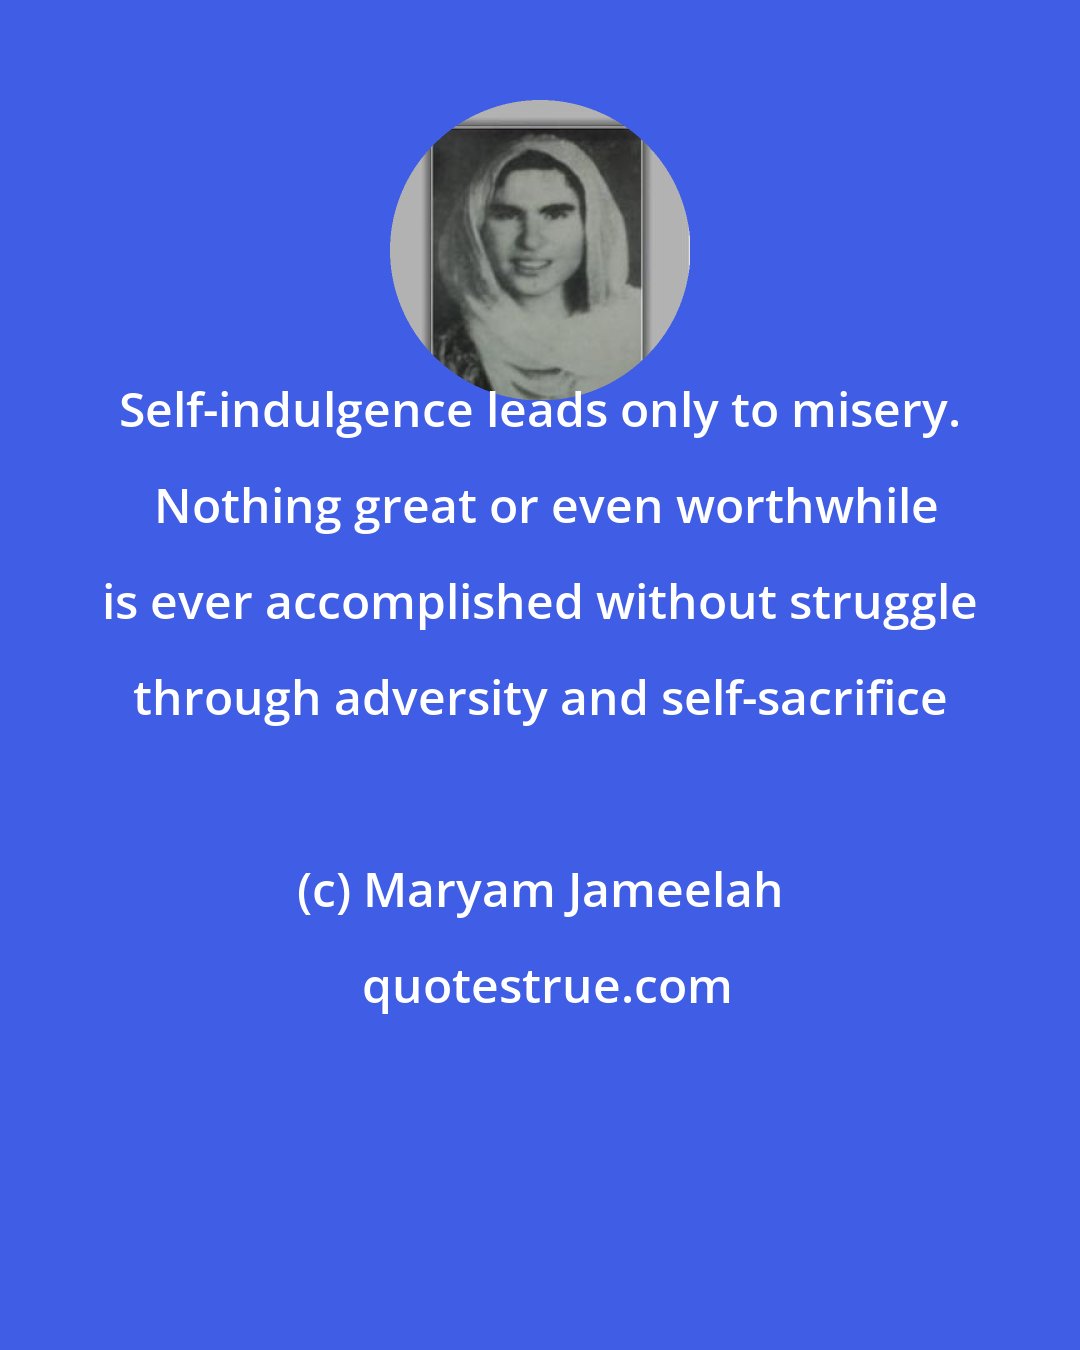 Maryam Jameelah: Self-indulgence leads only to misery.  Nothing great or even worthwhile is ever accomplished without struggle through adversity and self-sacrifice